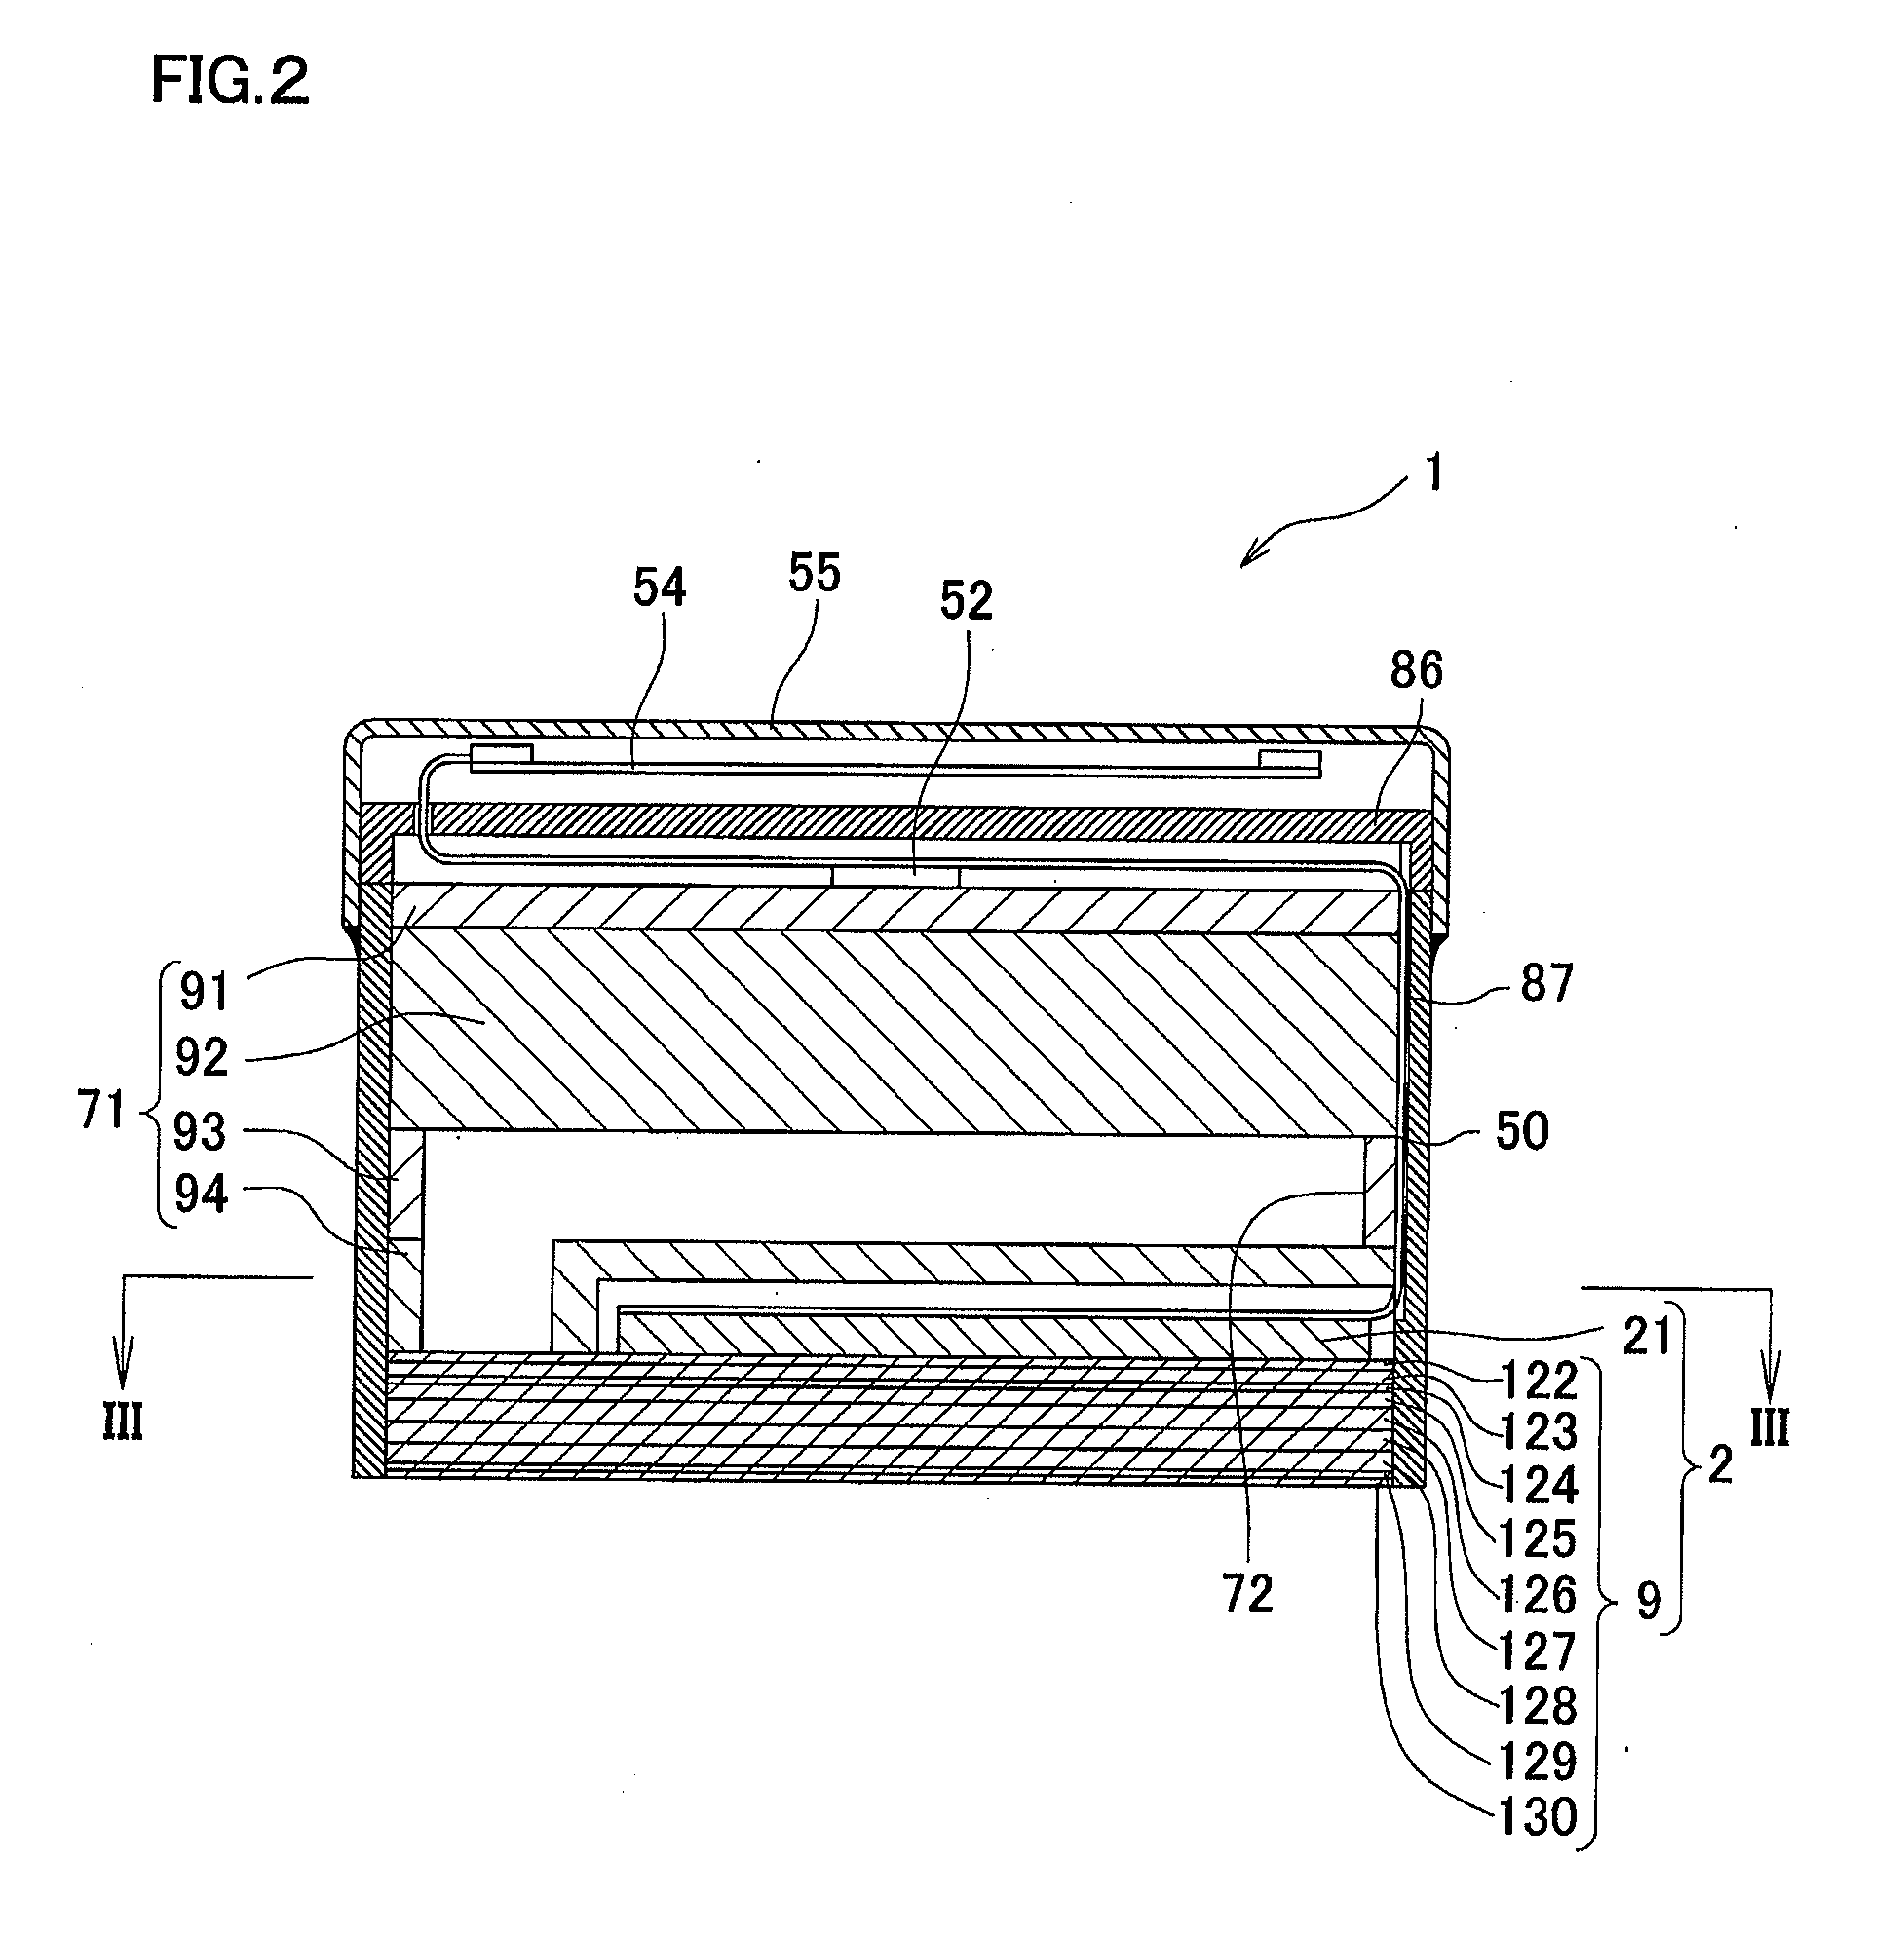 Image data processing apparatus and liquid ejection apparatus